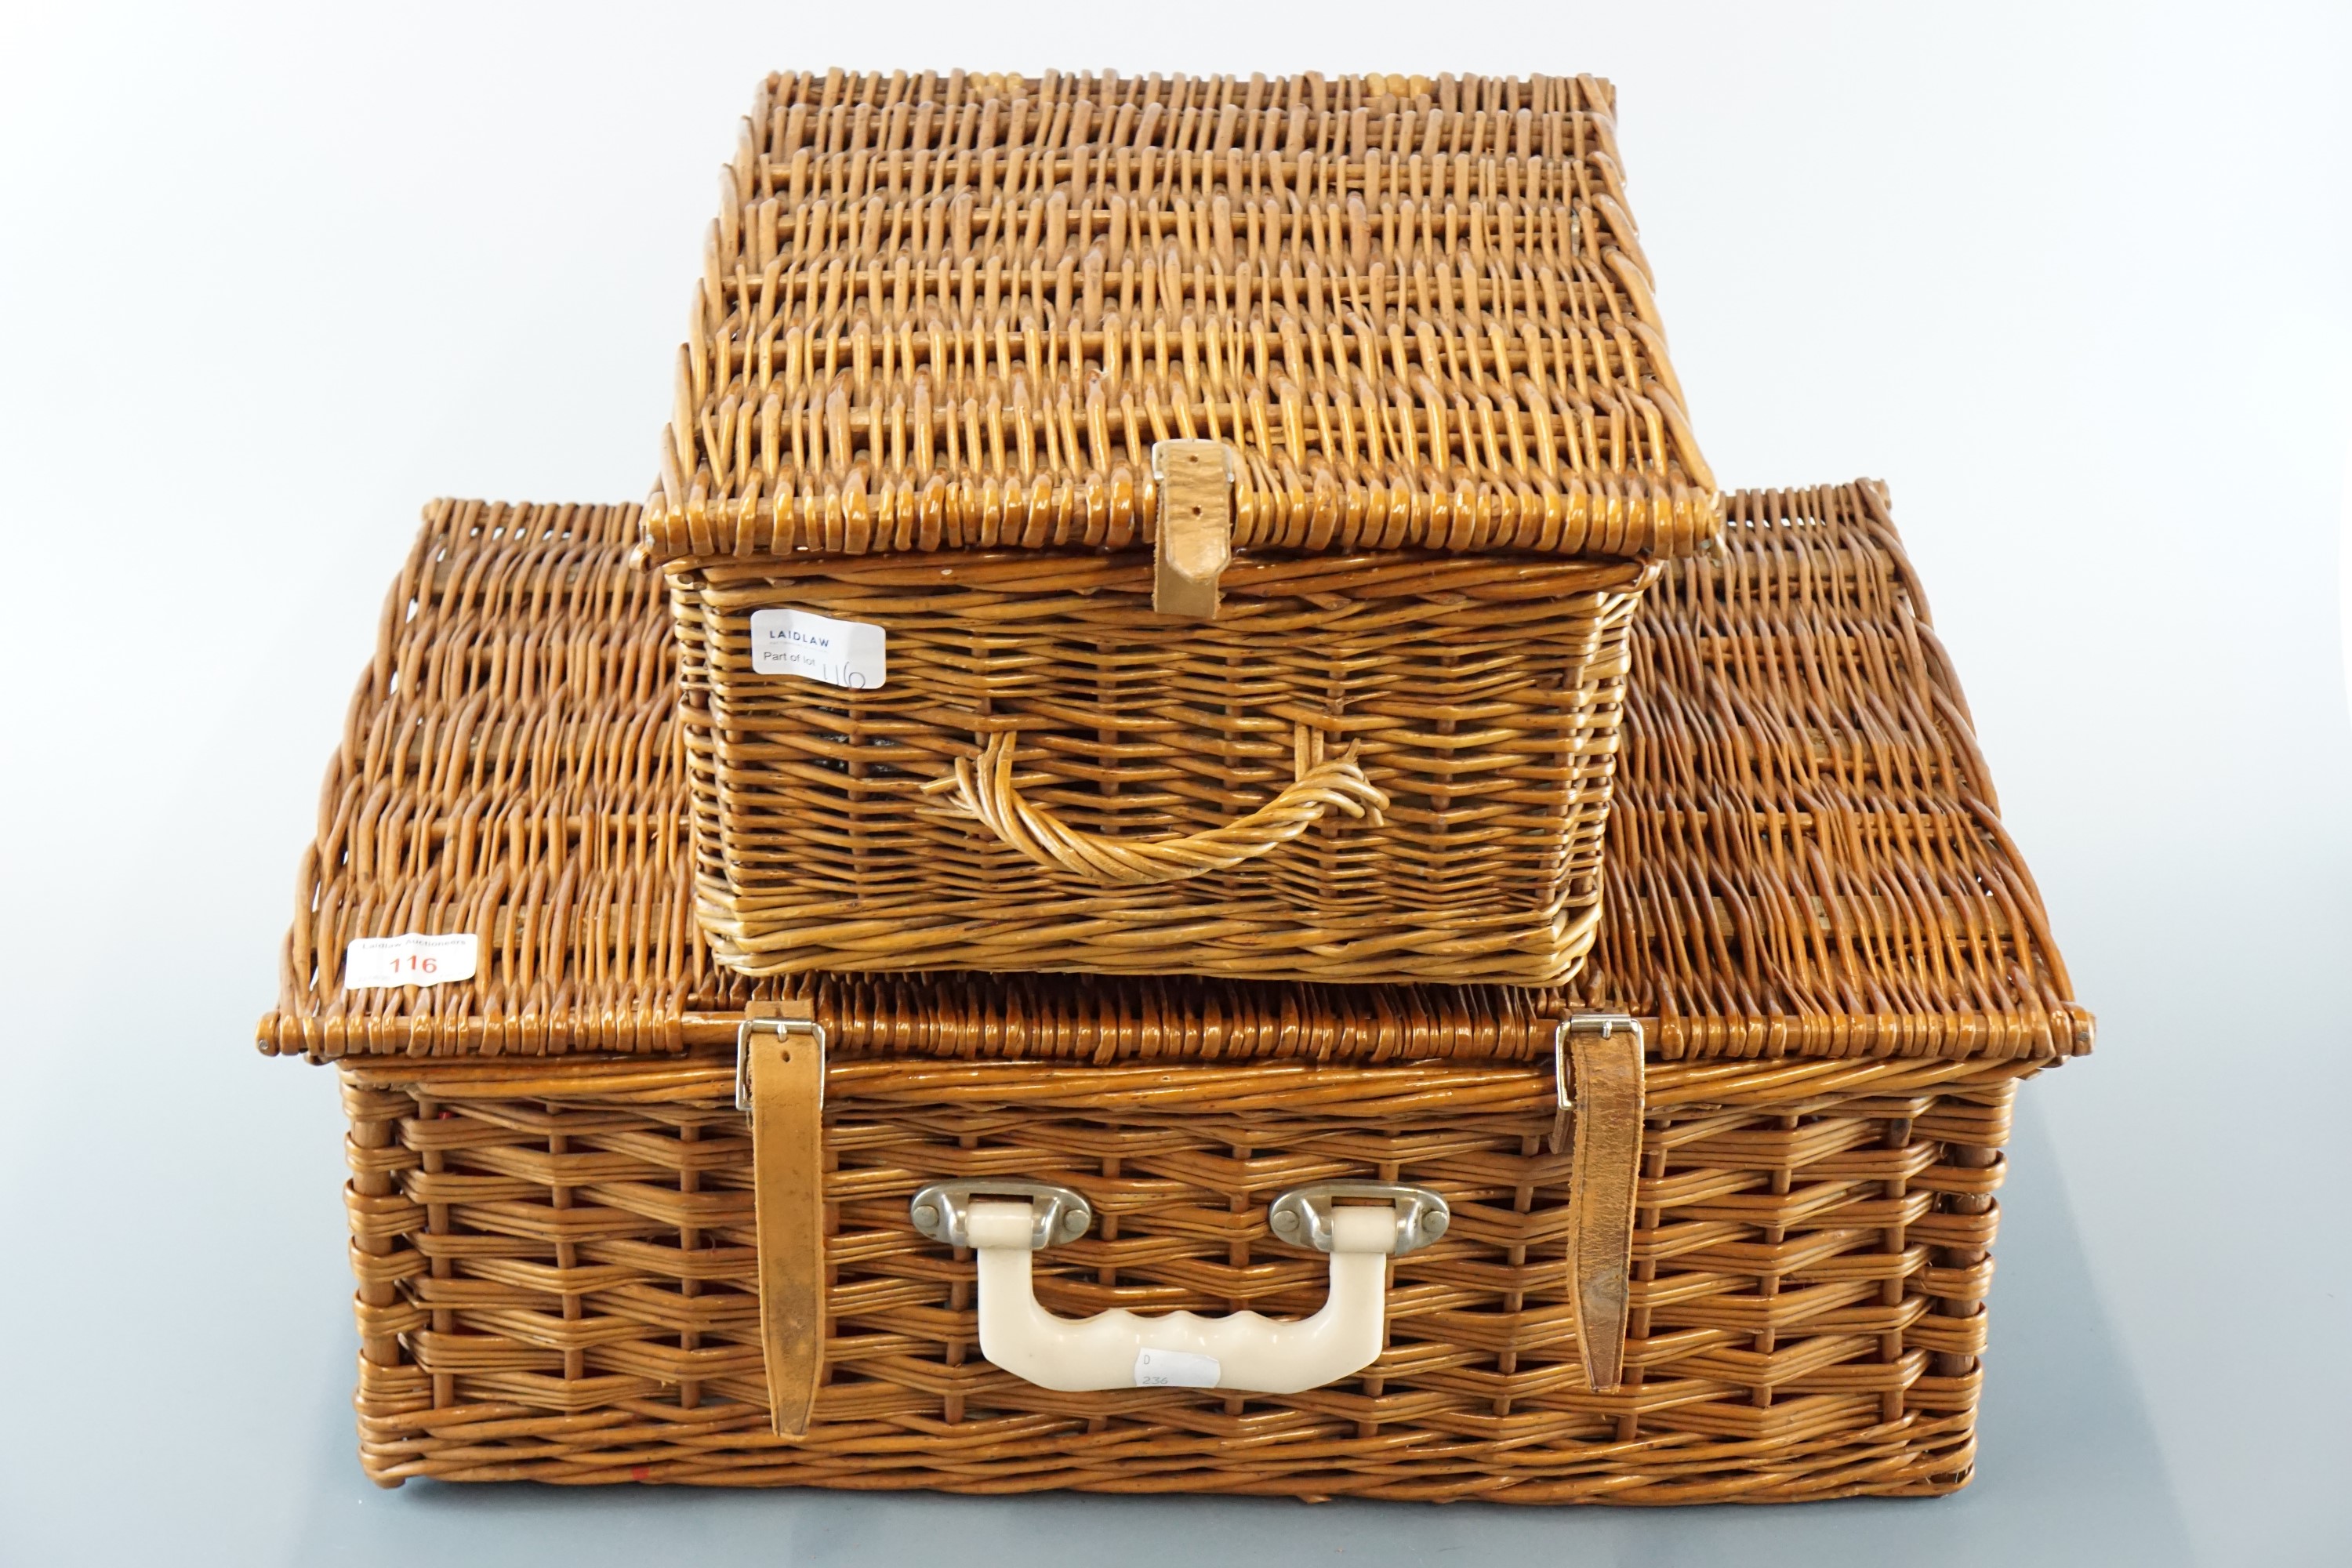 Brexton and Sirram picnic hampers